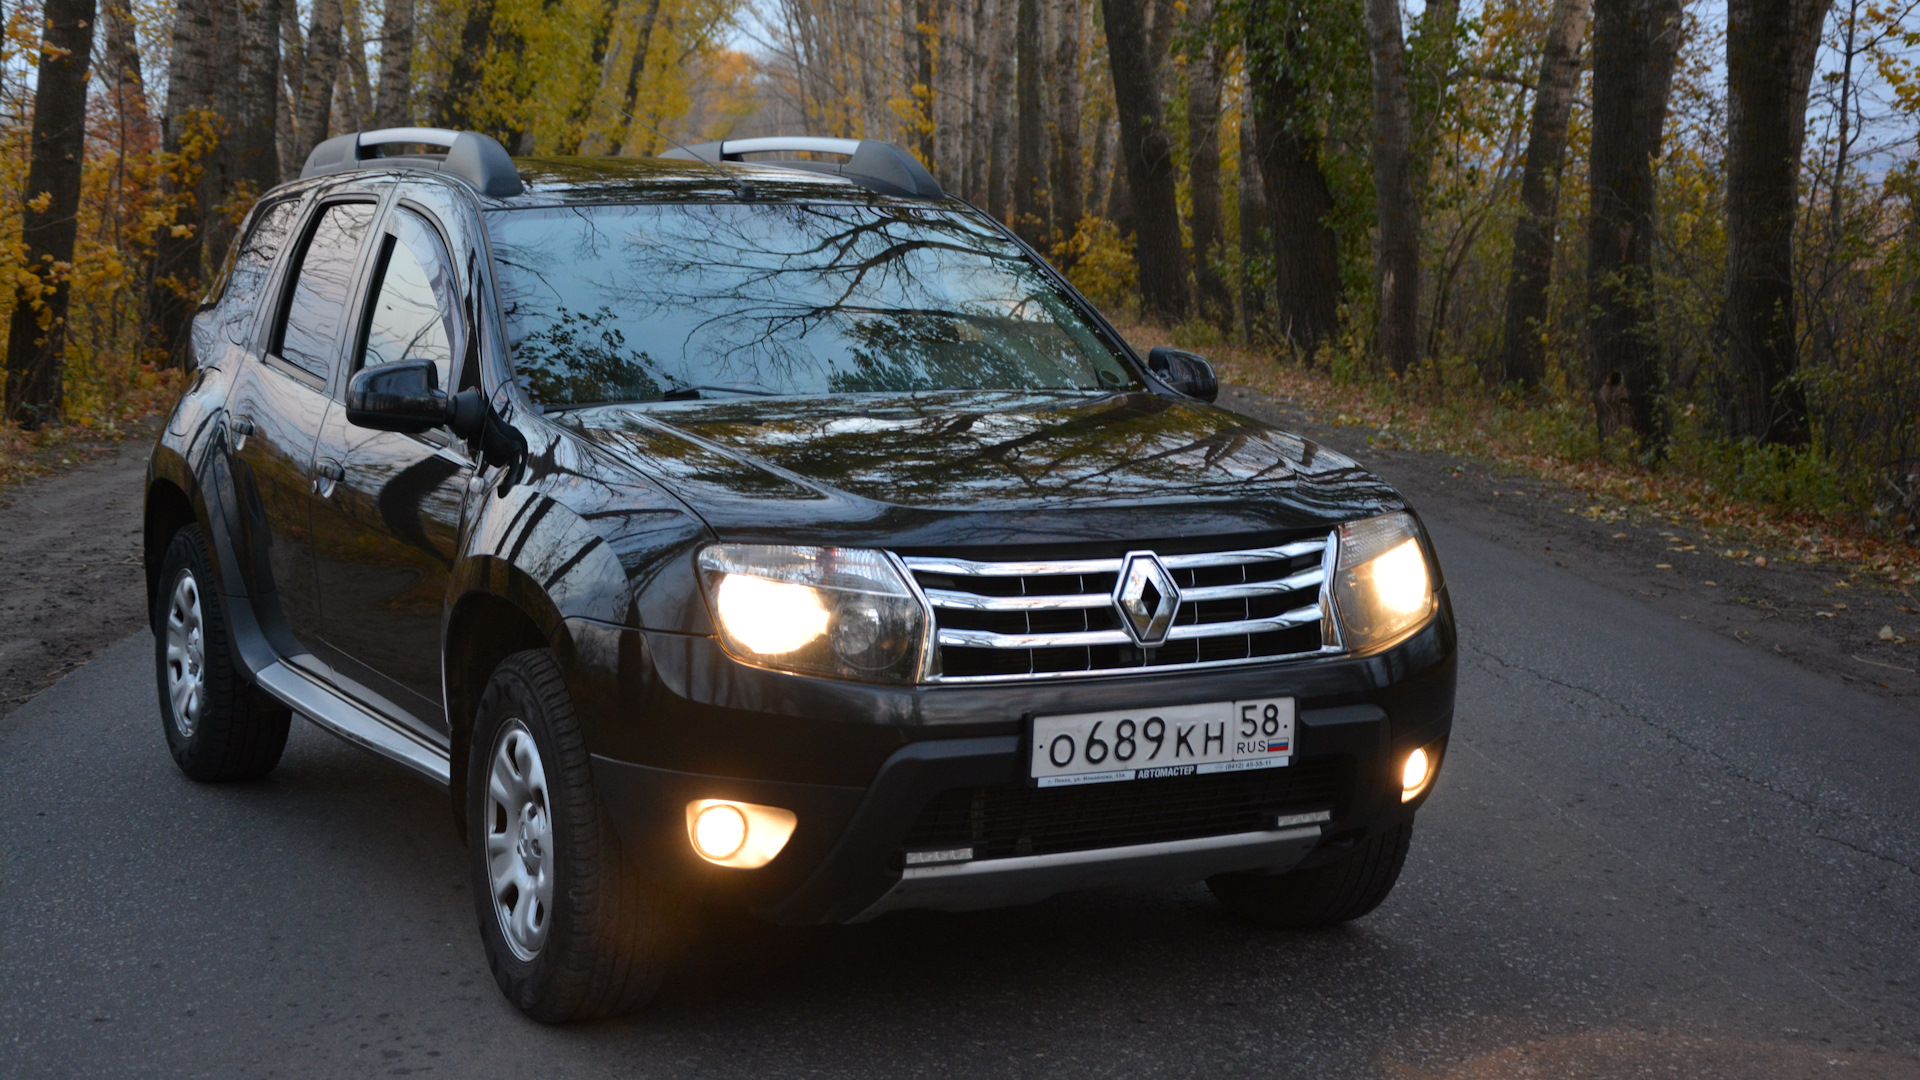 Renault duster 2014 год. Рено Дастер 2 черный. Черный Рено Дастер 2012 года. Рено Дастер 2015 черный. Renault Duster 2012.